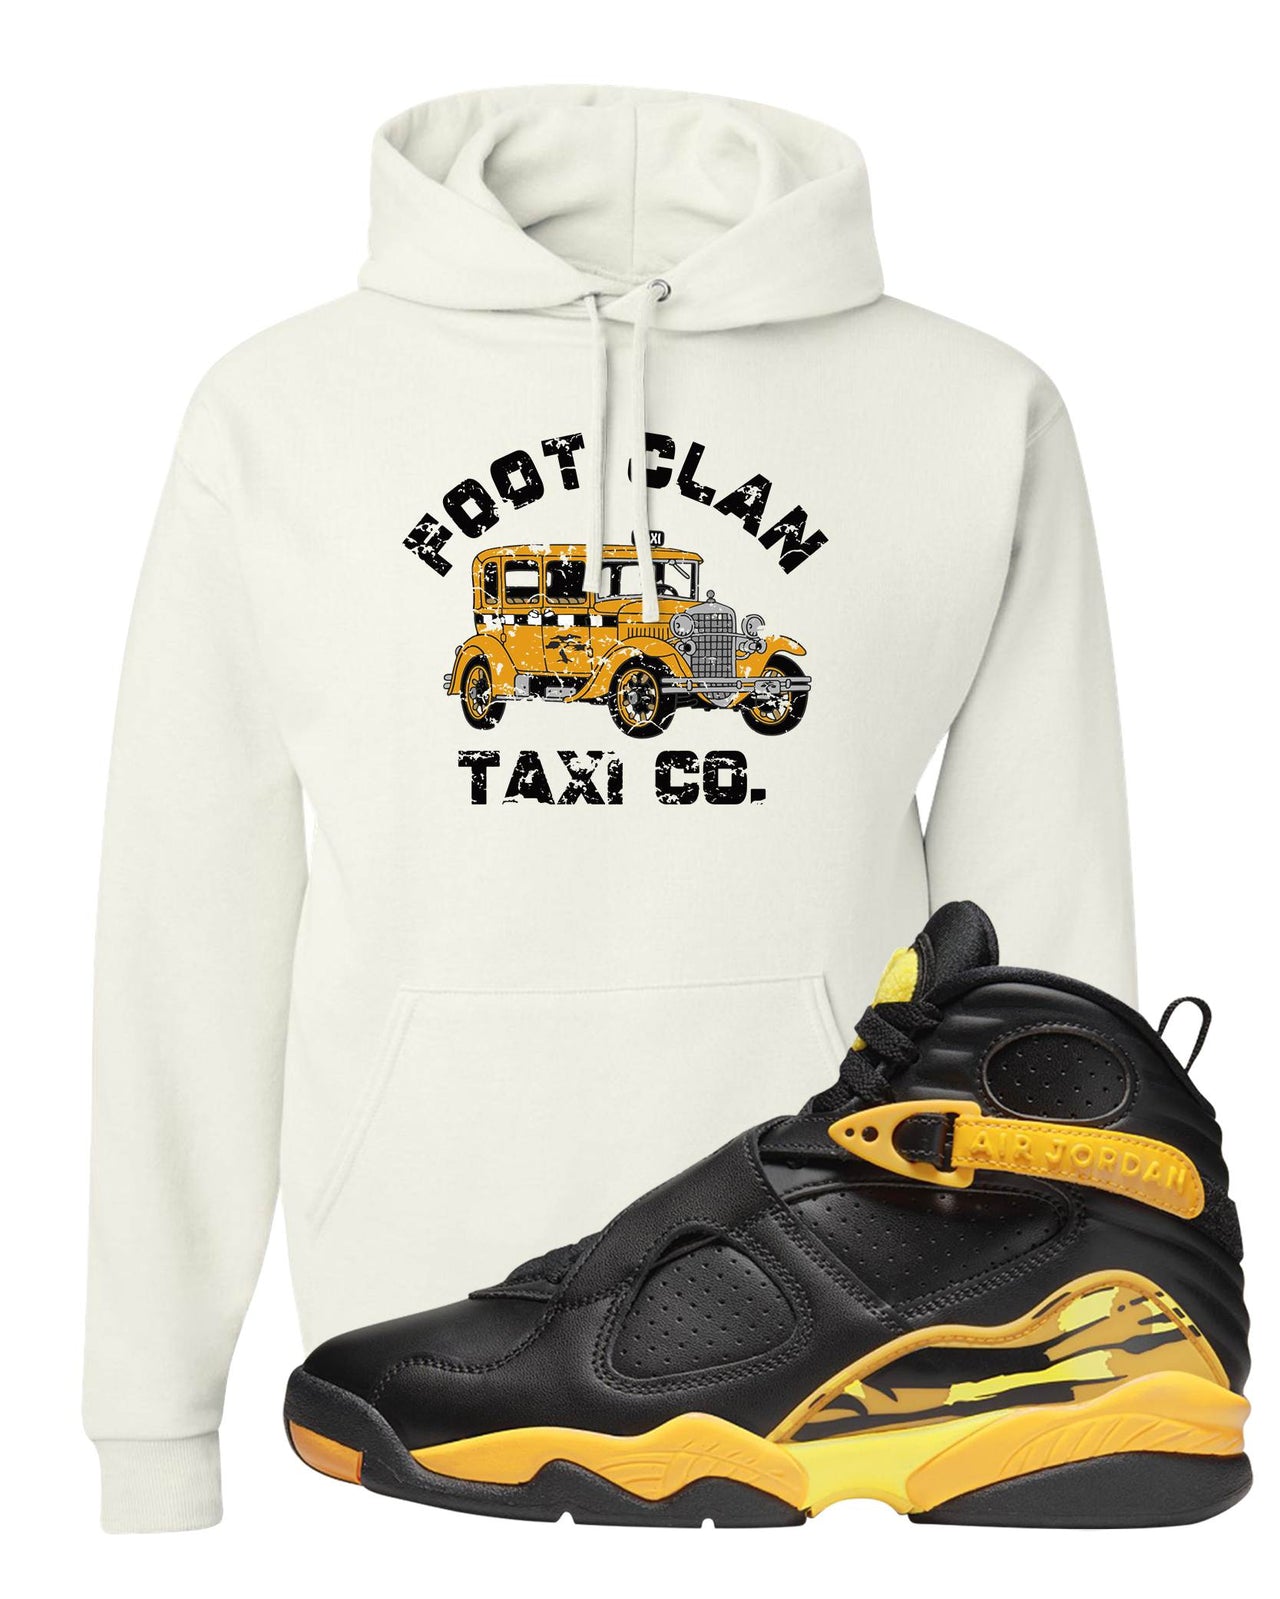 Taxi 8s Hoodie | Foot Clan Taxi Co., White